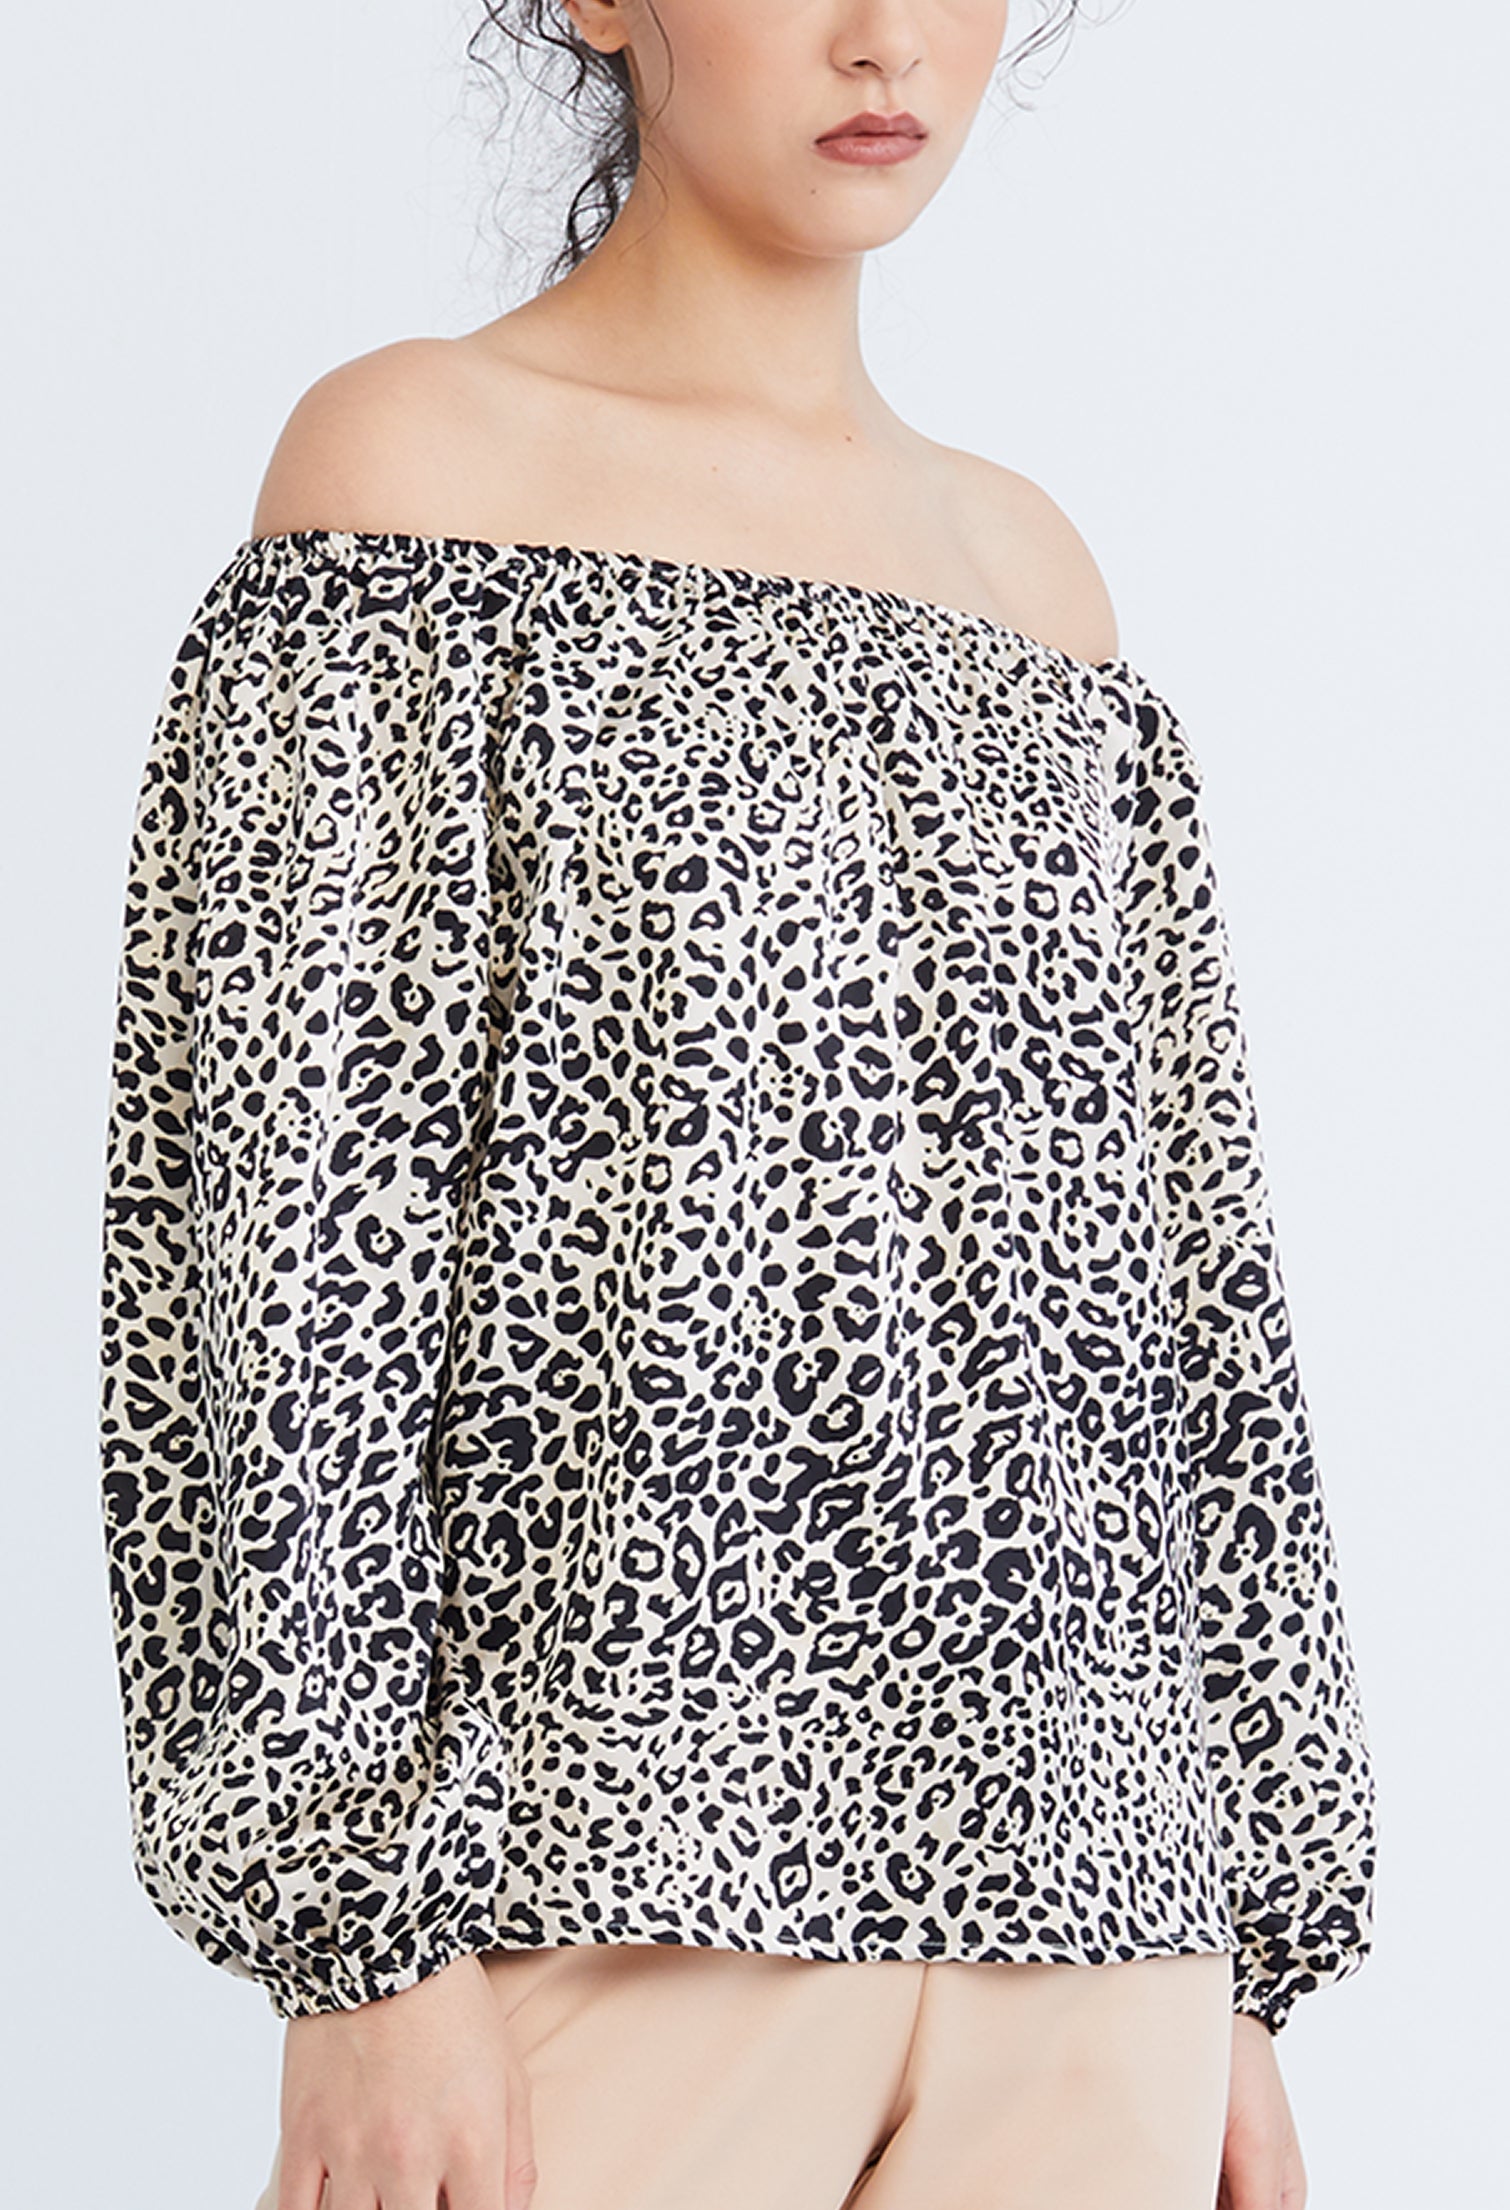 Leopard Spotted Print Blouse